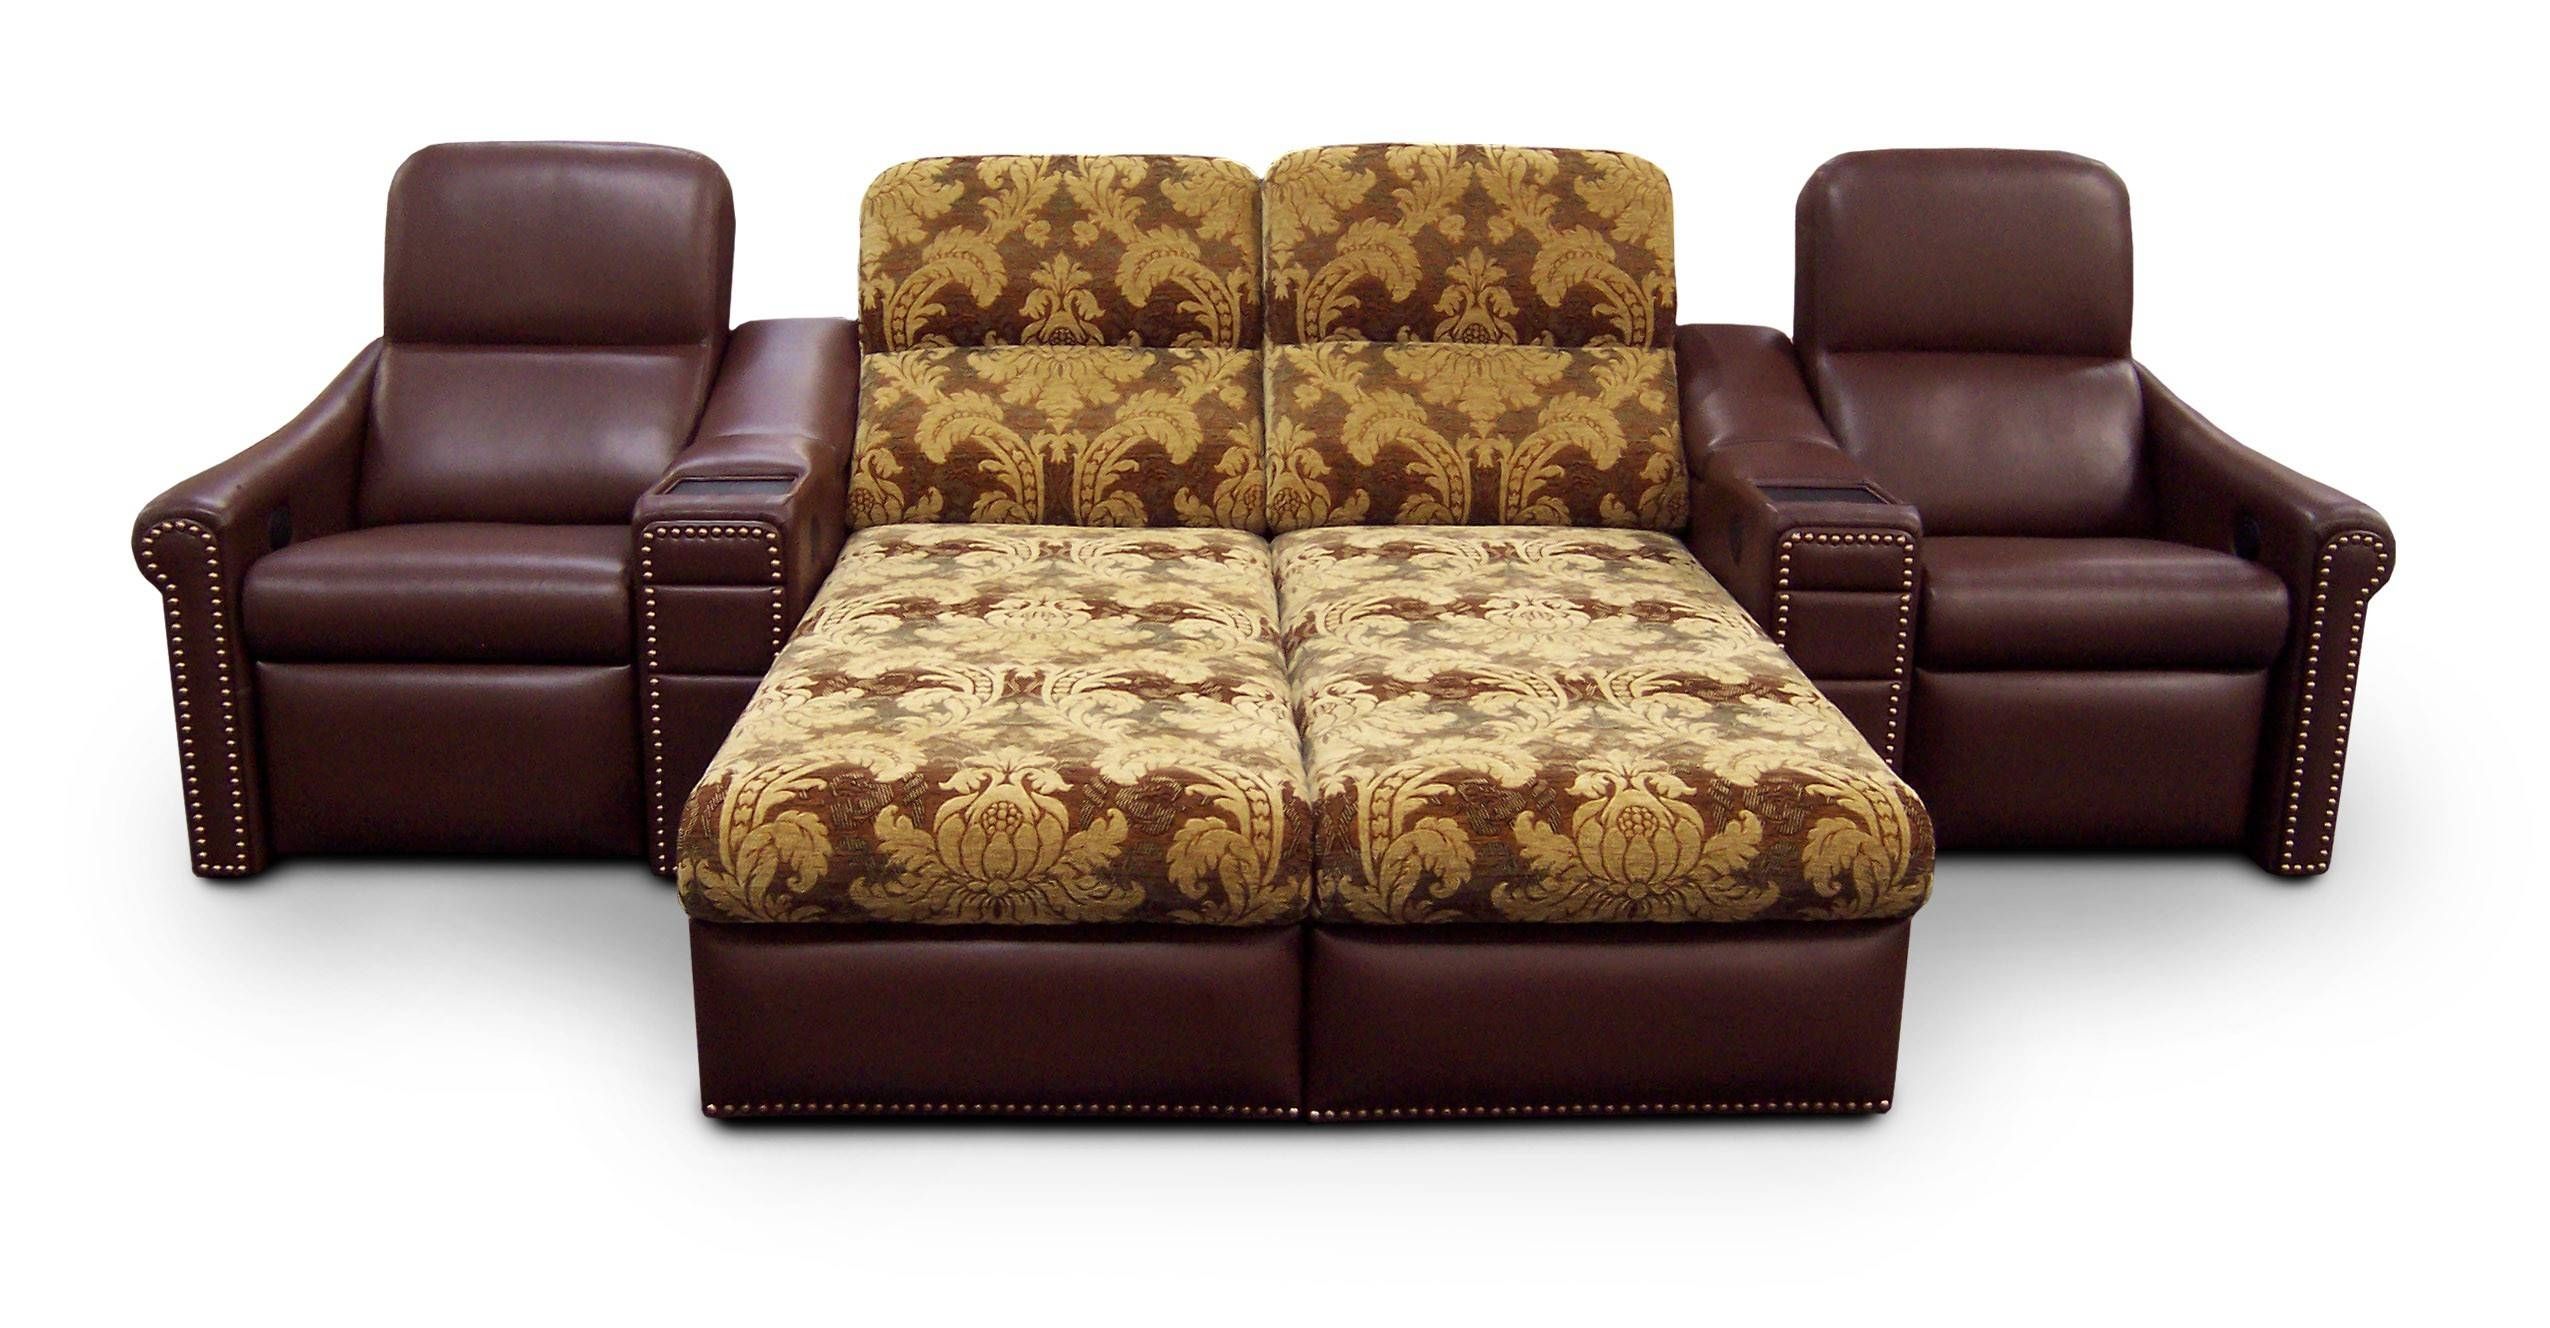 Sofas Center : Double Chaise Lounge Sectional Sofa Chair Intended For Chaise Sofa Chairs (View 9 of 15)